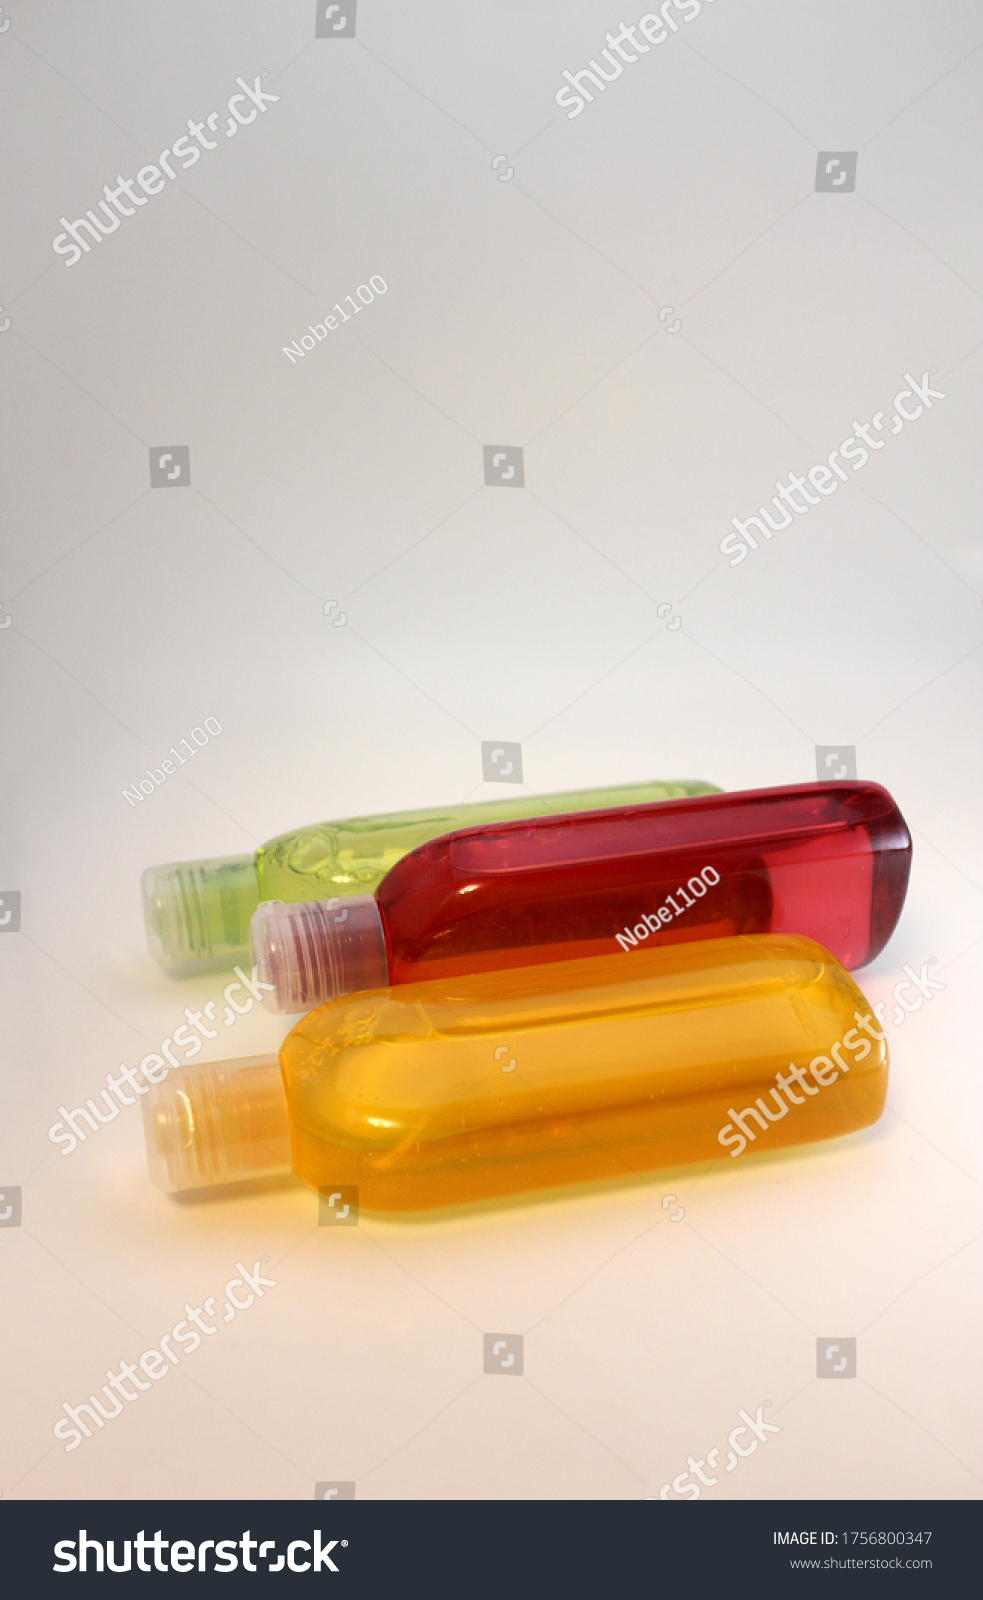 Download Shampoo Bottle Colorful Green Red Yellow Stock Photo Edit Now 1756800347 PSD Mockup Templates